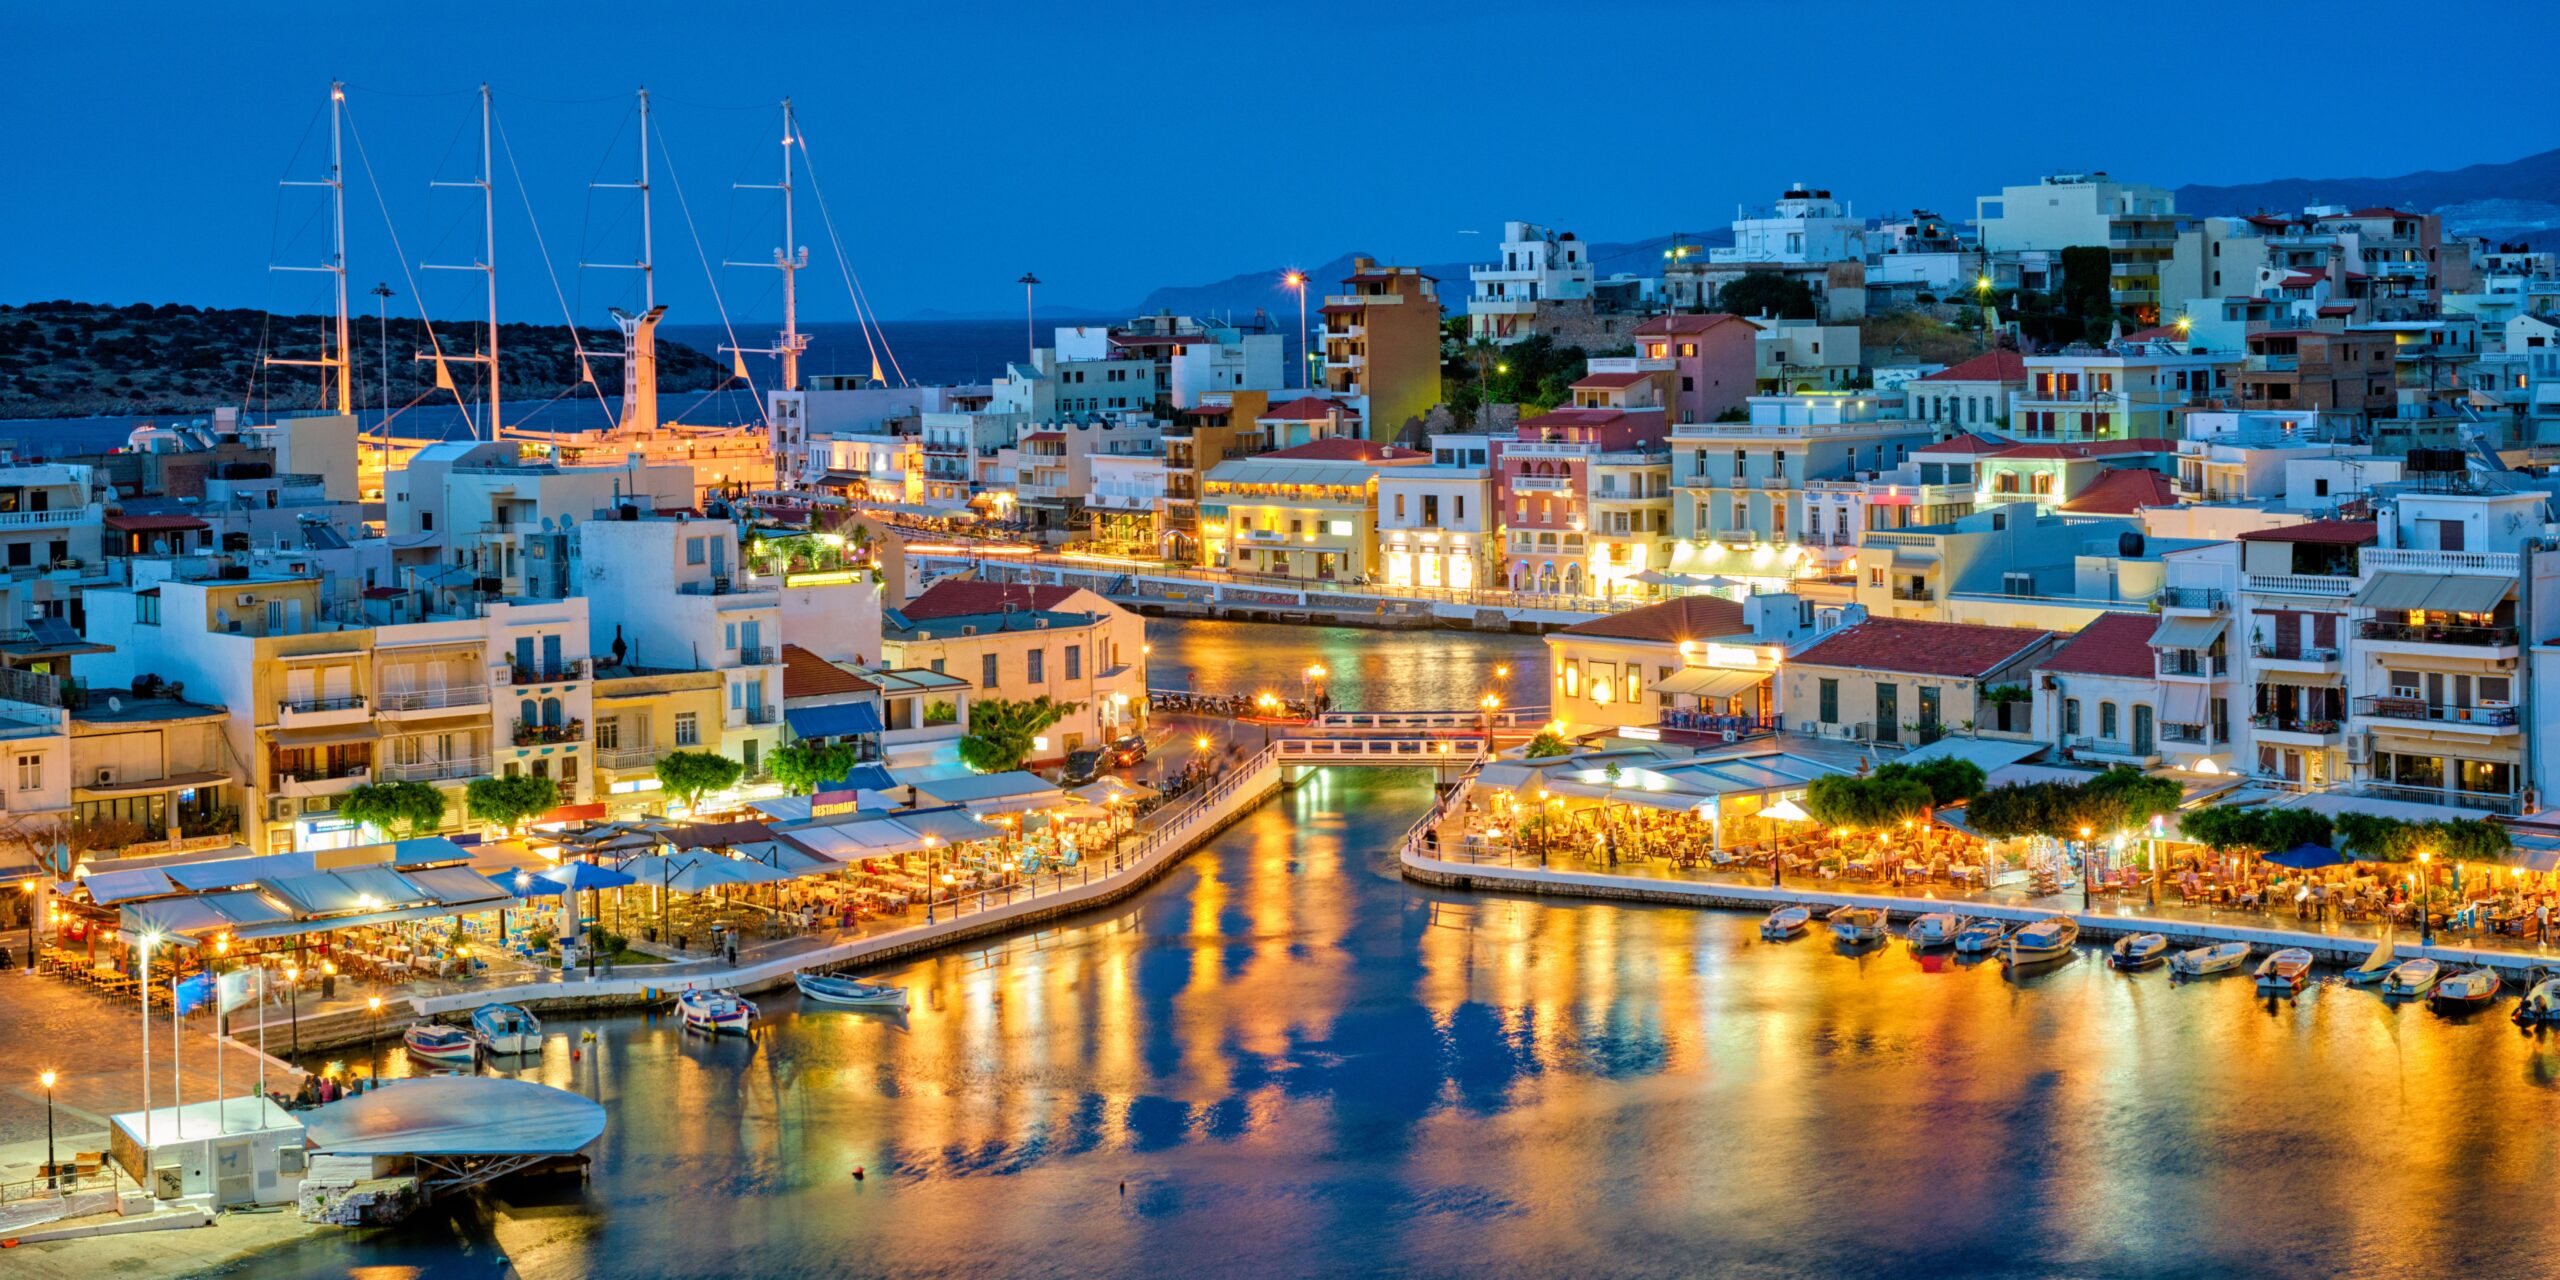 Evening view of a lit-up waterfront with buildings and moored sailboats in a Greek town.